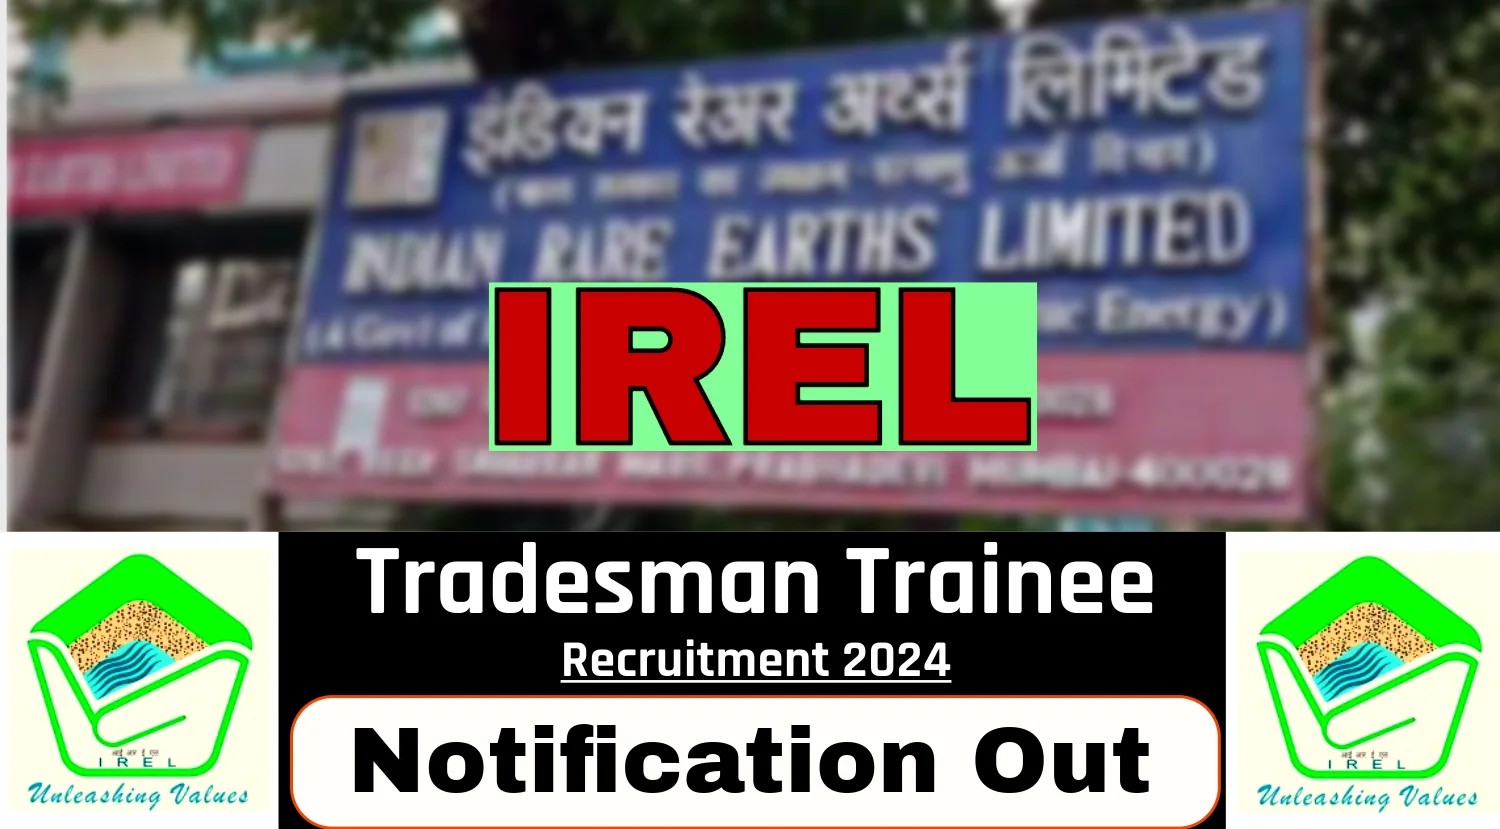 IREL Tradesman Recruitment 2024-Check Eligibility and Apply Online For 67 Posts Now